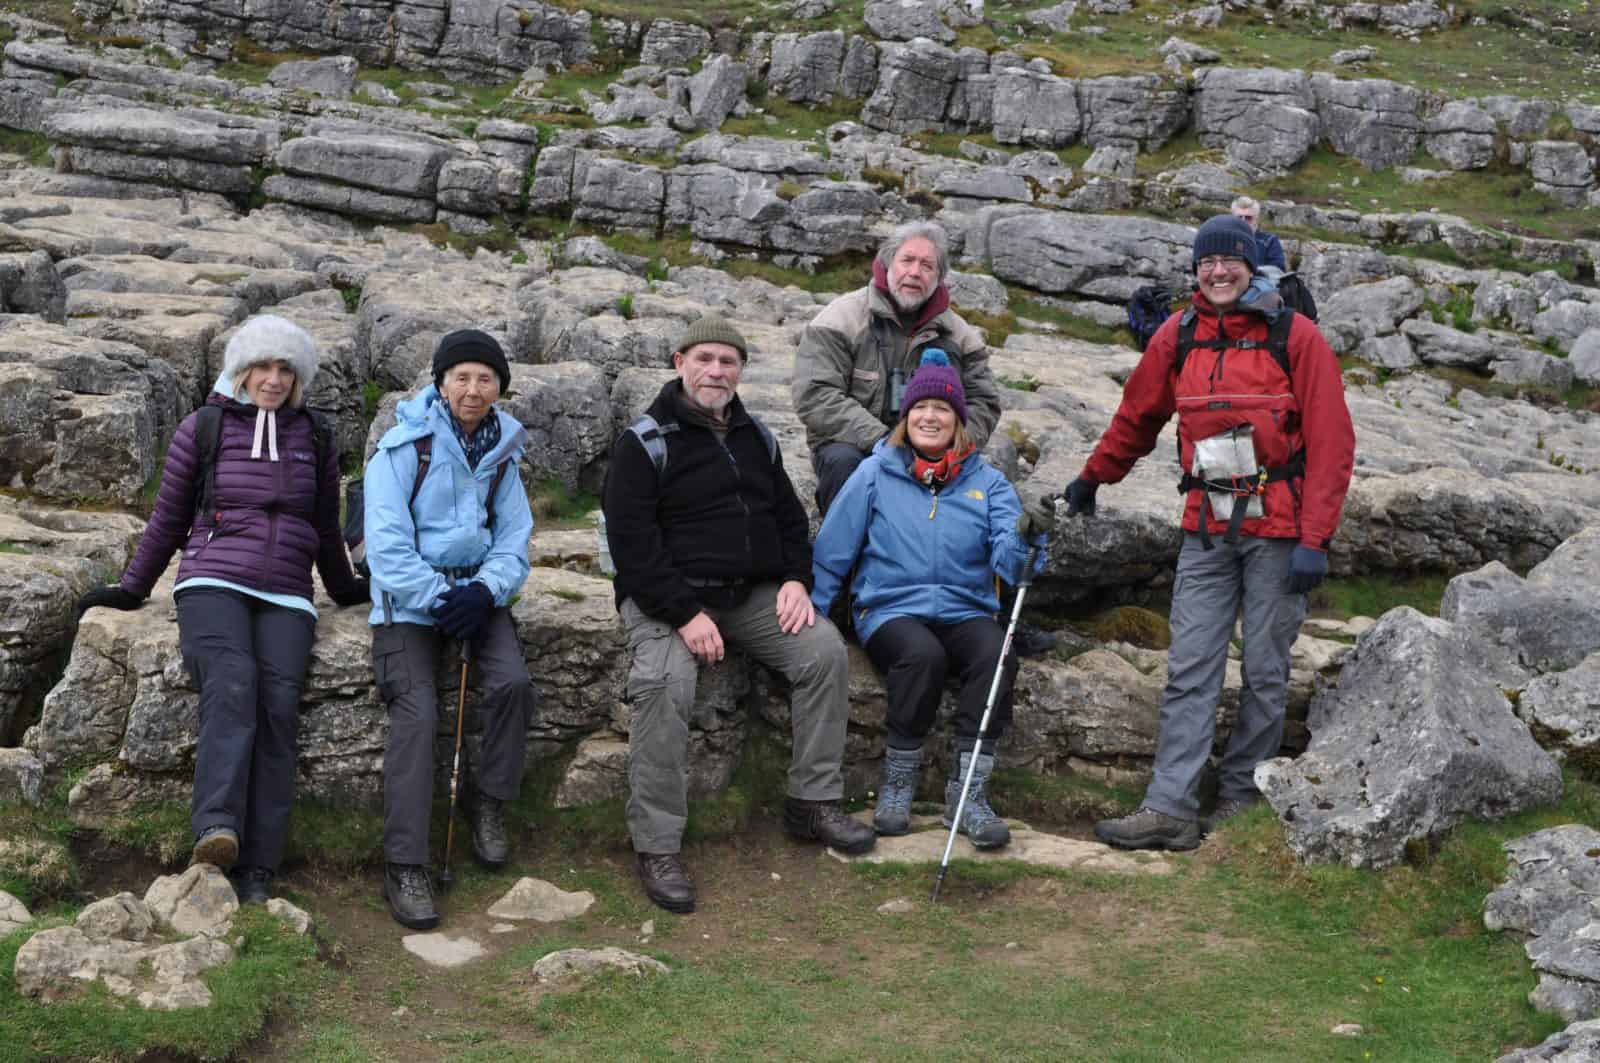 Walking and Wellbeing participants at Malham Tarn